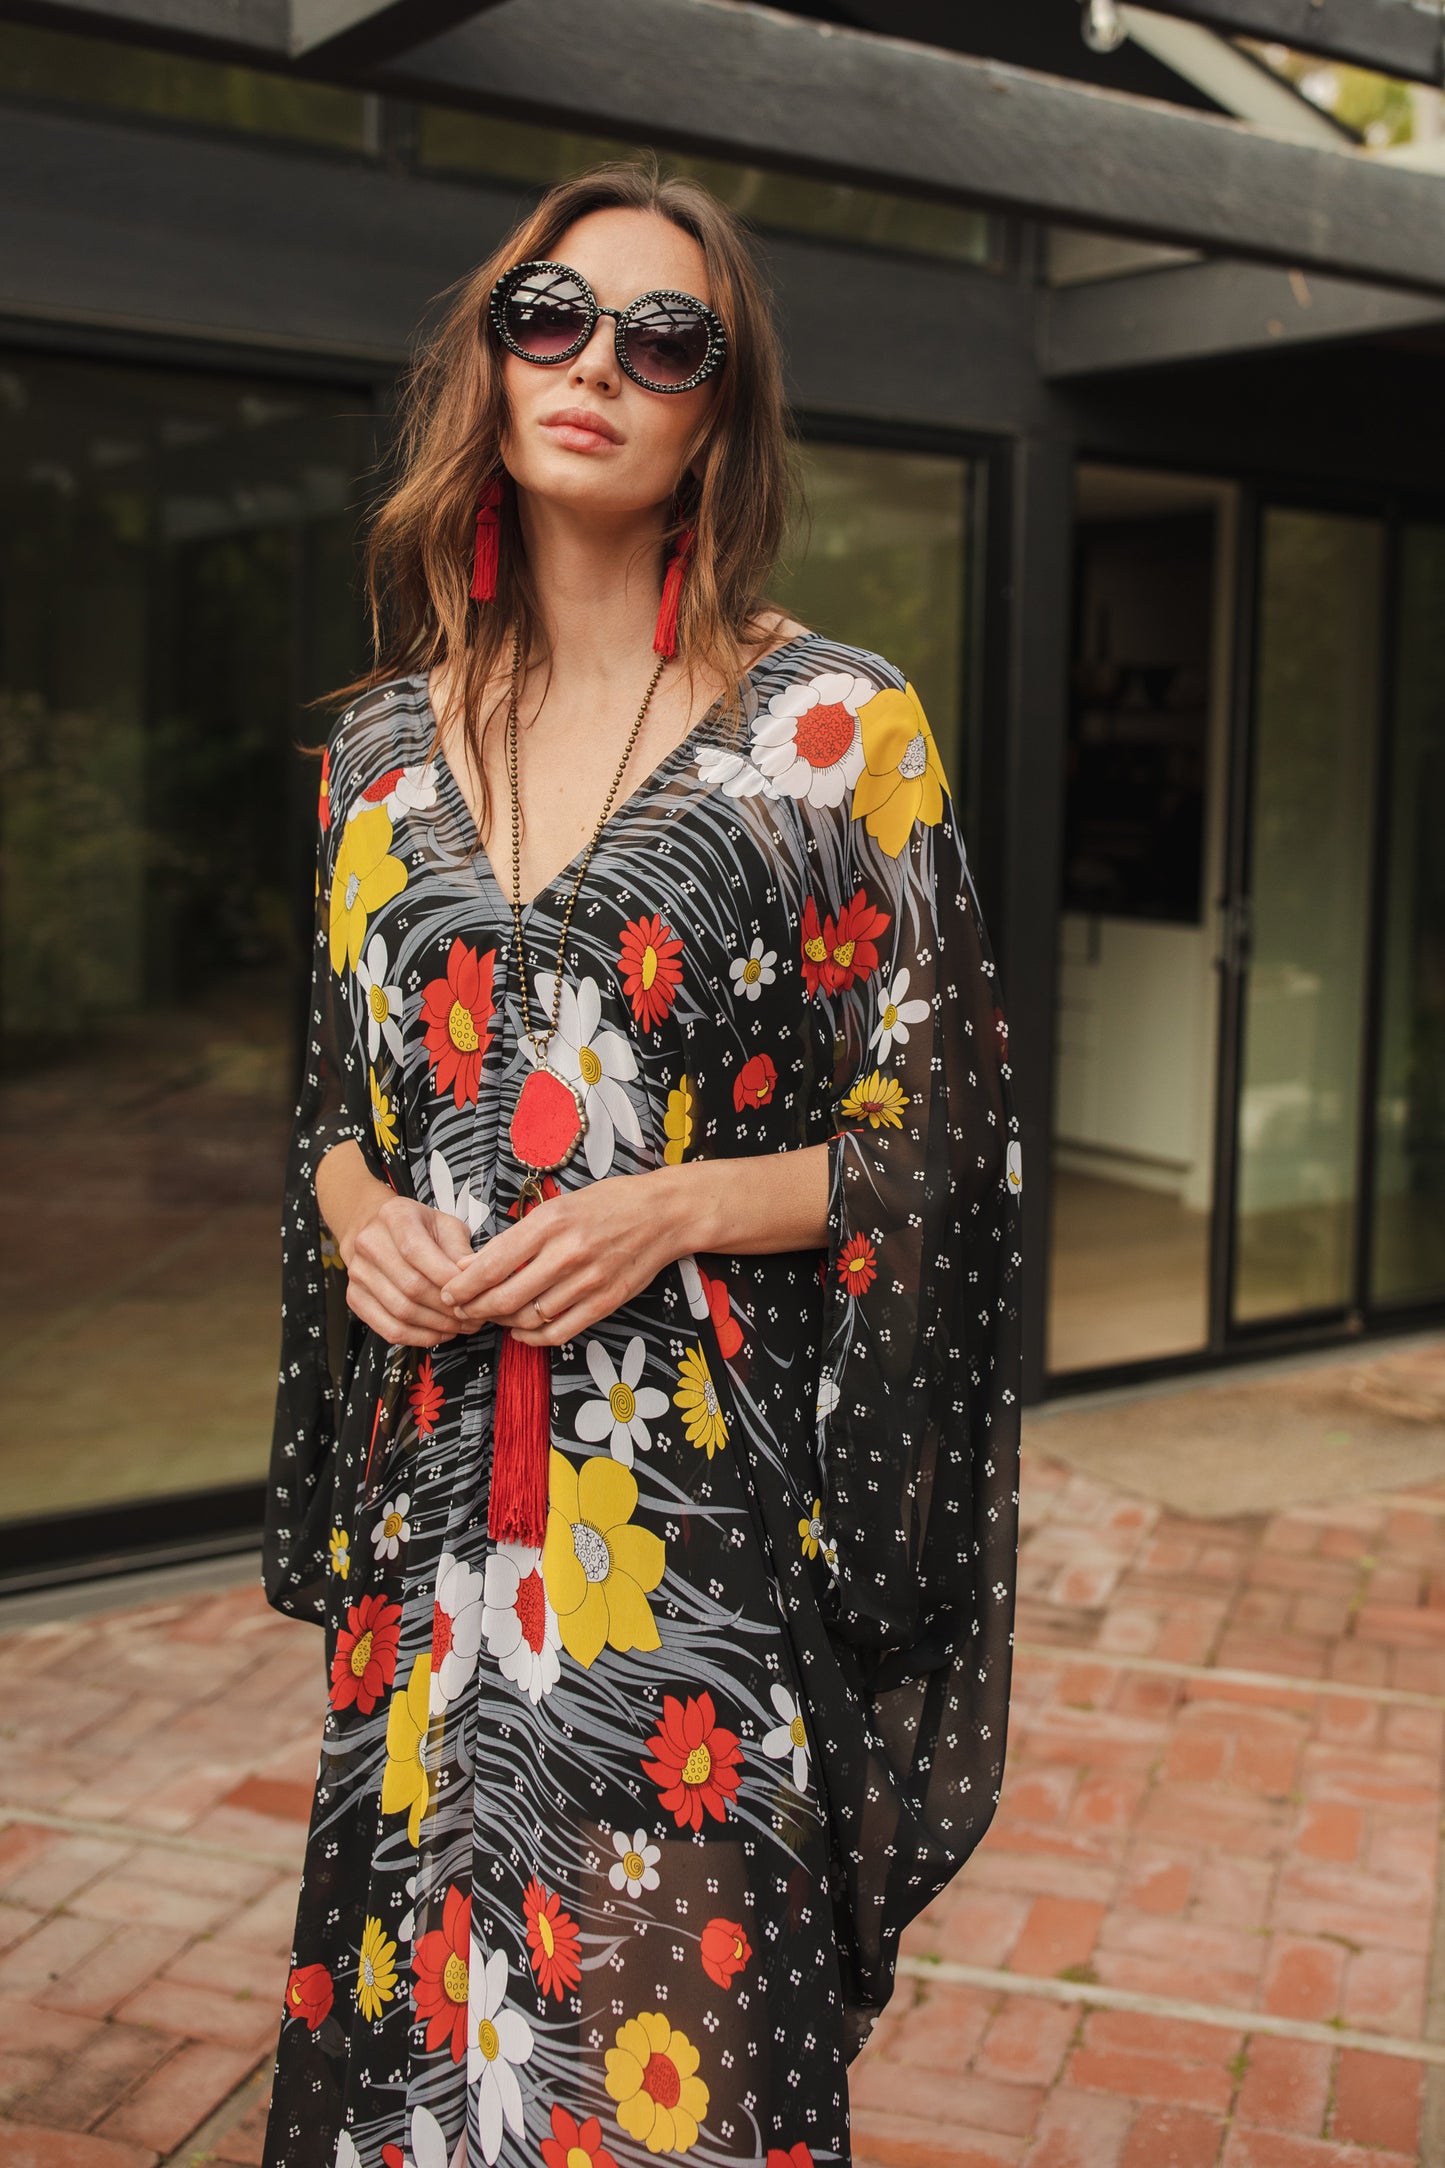 Flowy chiffon caftan with whimsical daisy print. Base color is black with a mixture of orange, white, and yellow floral patterns. Features a v-neck, batwing sleeves, and ankle hem.